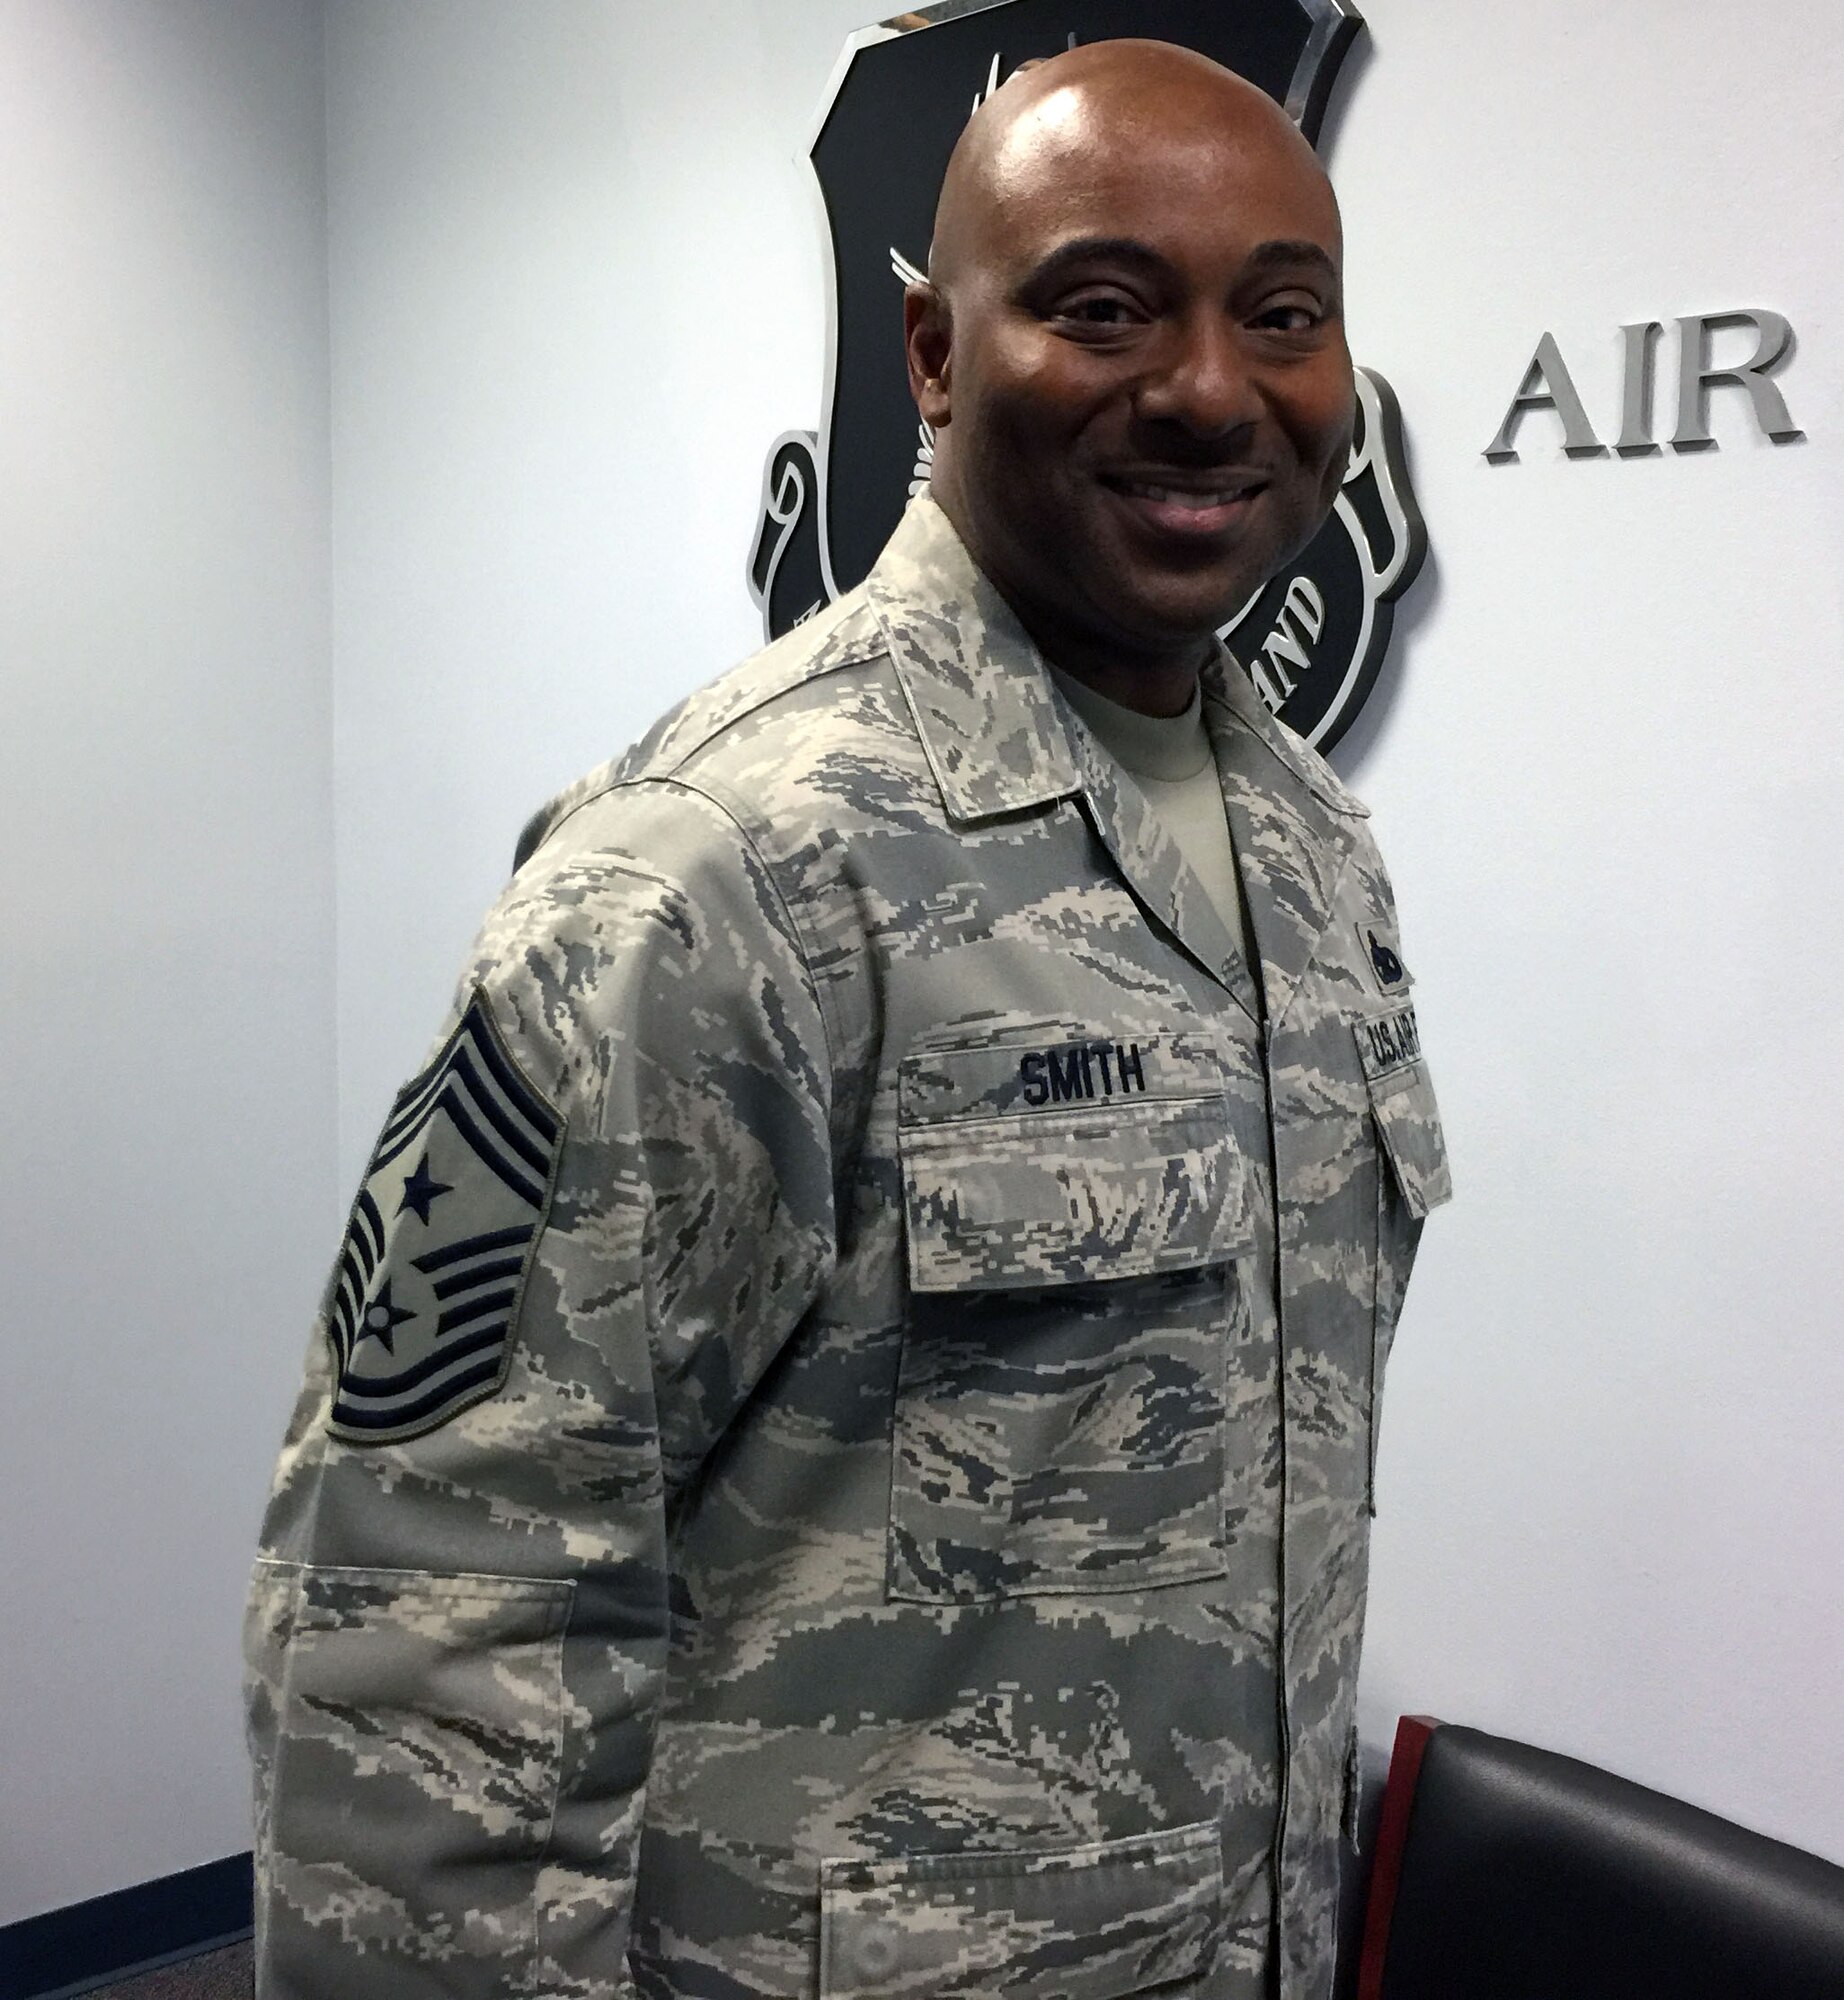 Chief Master Sgt. Kenellias Smith is the new Command Chief at the 446th Airlift ‘Rainier’ Wing. We caught up with him for a brief question and answer session to discuss his plans as the new Command Chief. (U.S. Air Force Reserve photo by Maj. Brooke Davis)